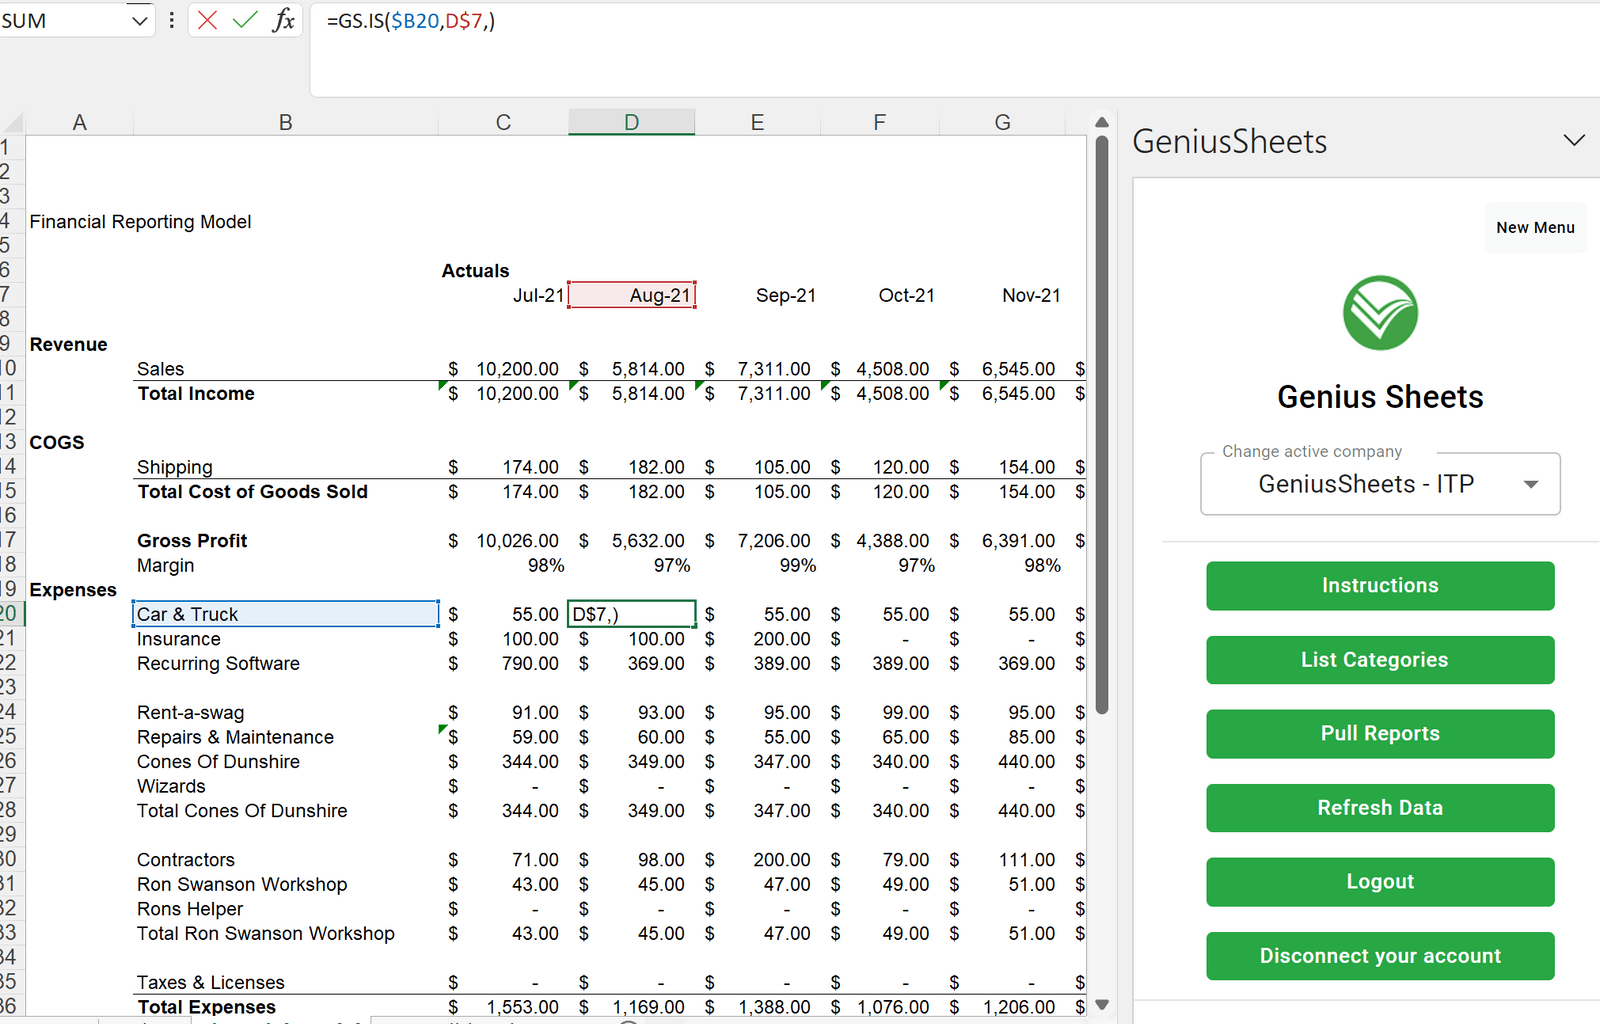 Genius Sheets - Generate reports, financial models, and instant analysis from Text Prompts